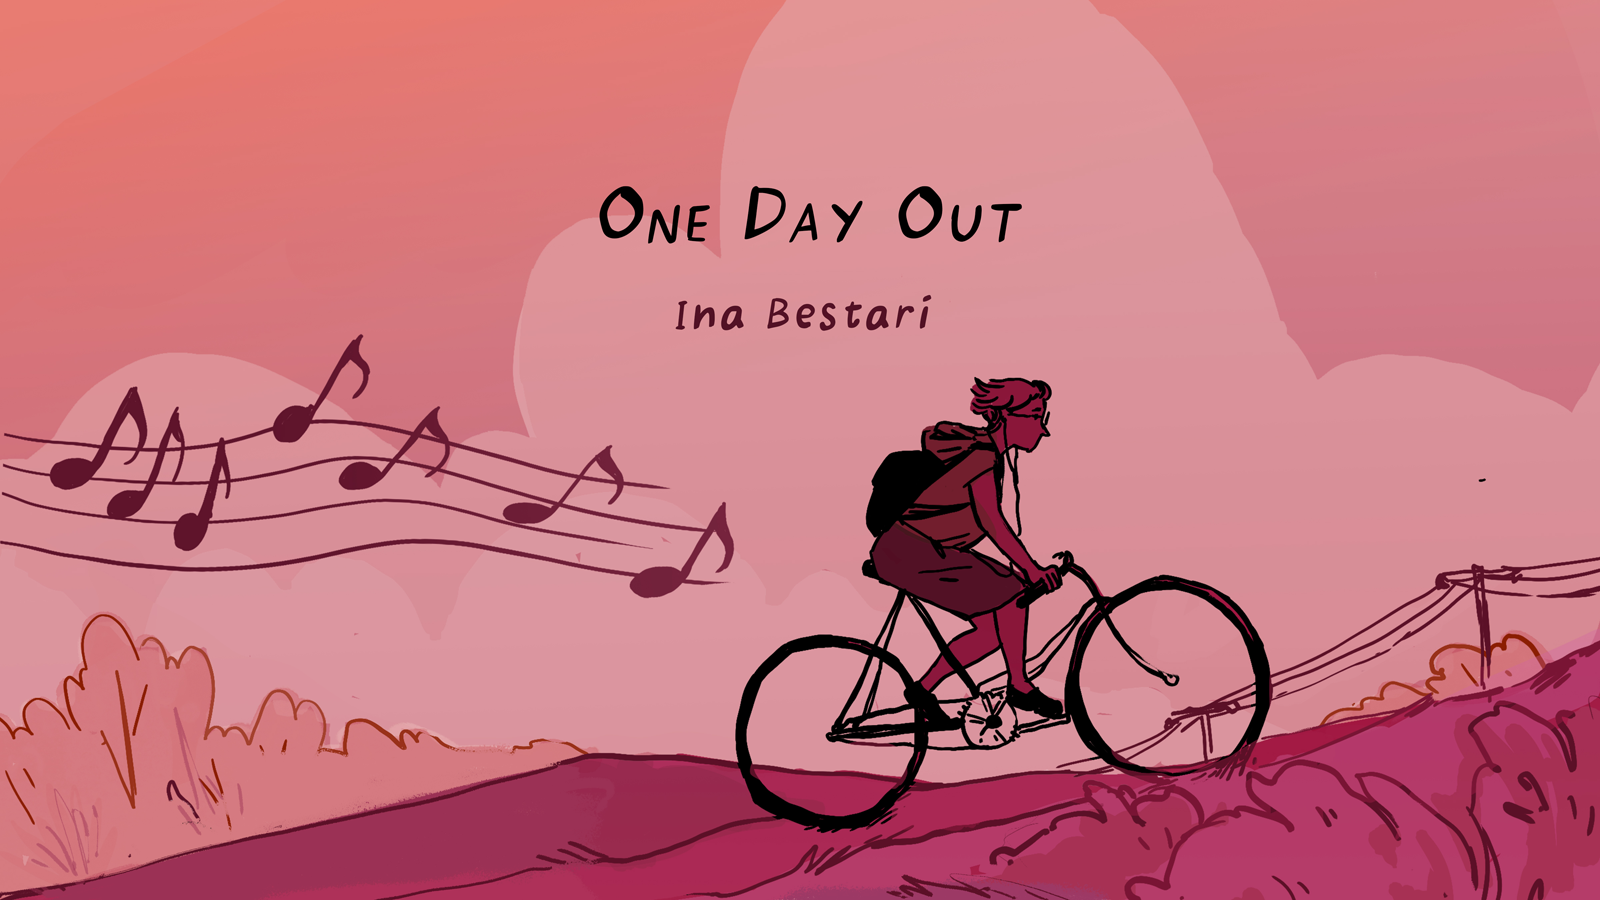 A Day Out - New Naratif